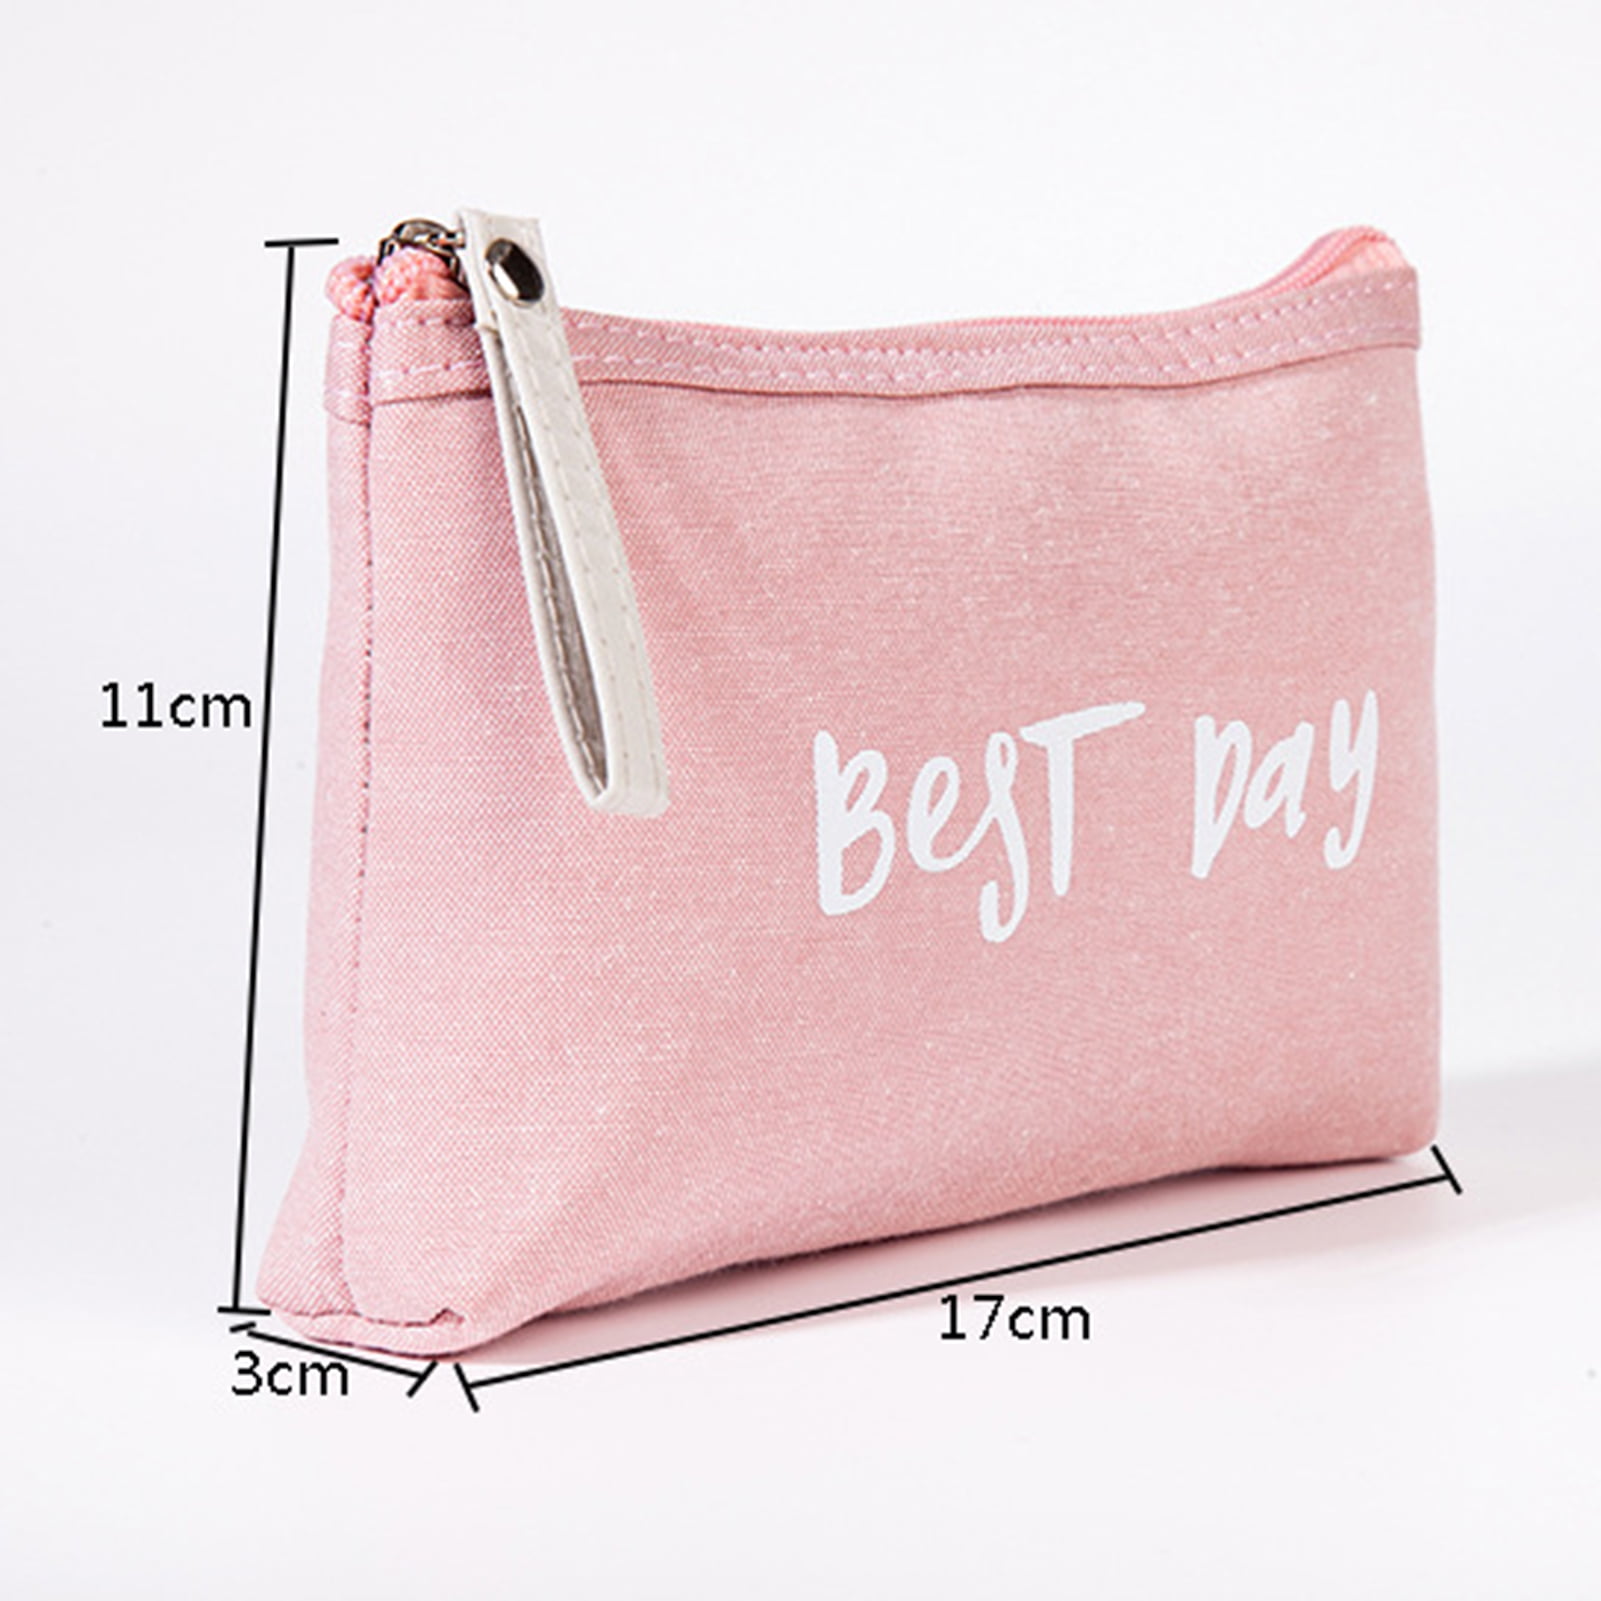 Designer Women Cosmetic Bag Genuine Leather Makeup Bags Make Up Box Large  Travel Organizer Travel Toiletry Bag Totes231V From Leanne99, $24.67